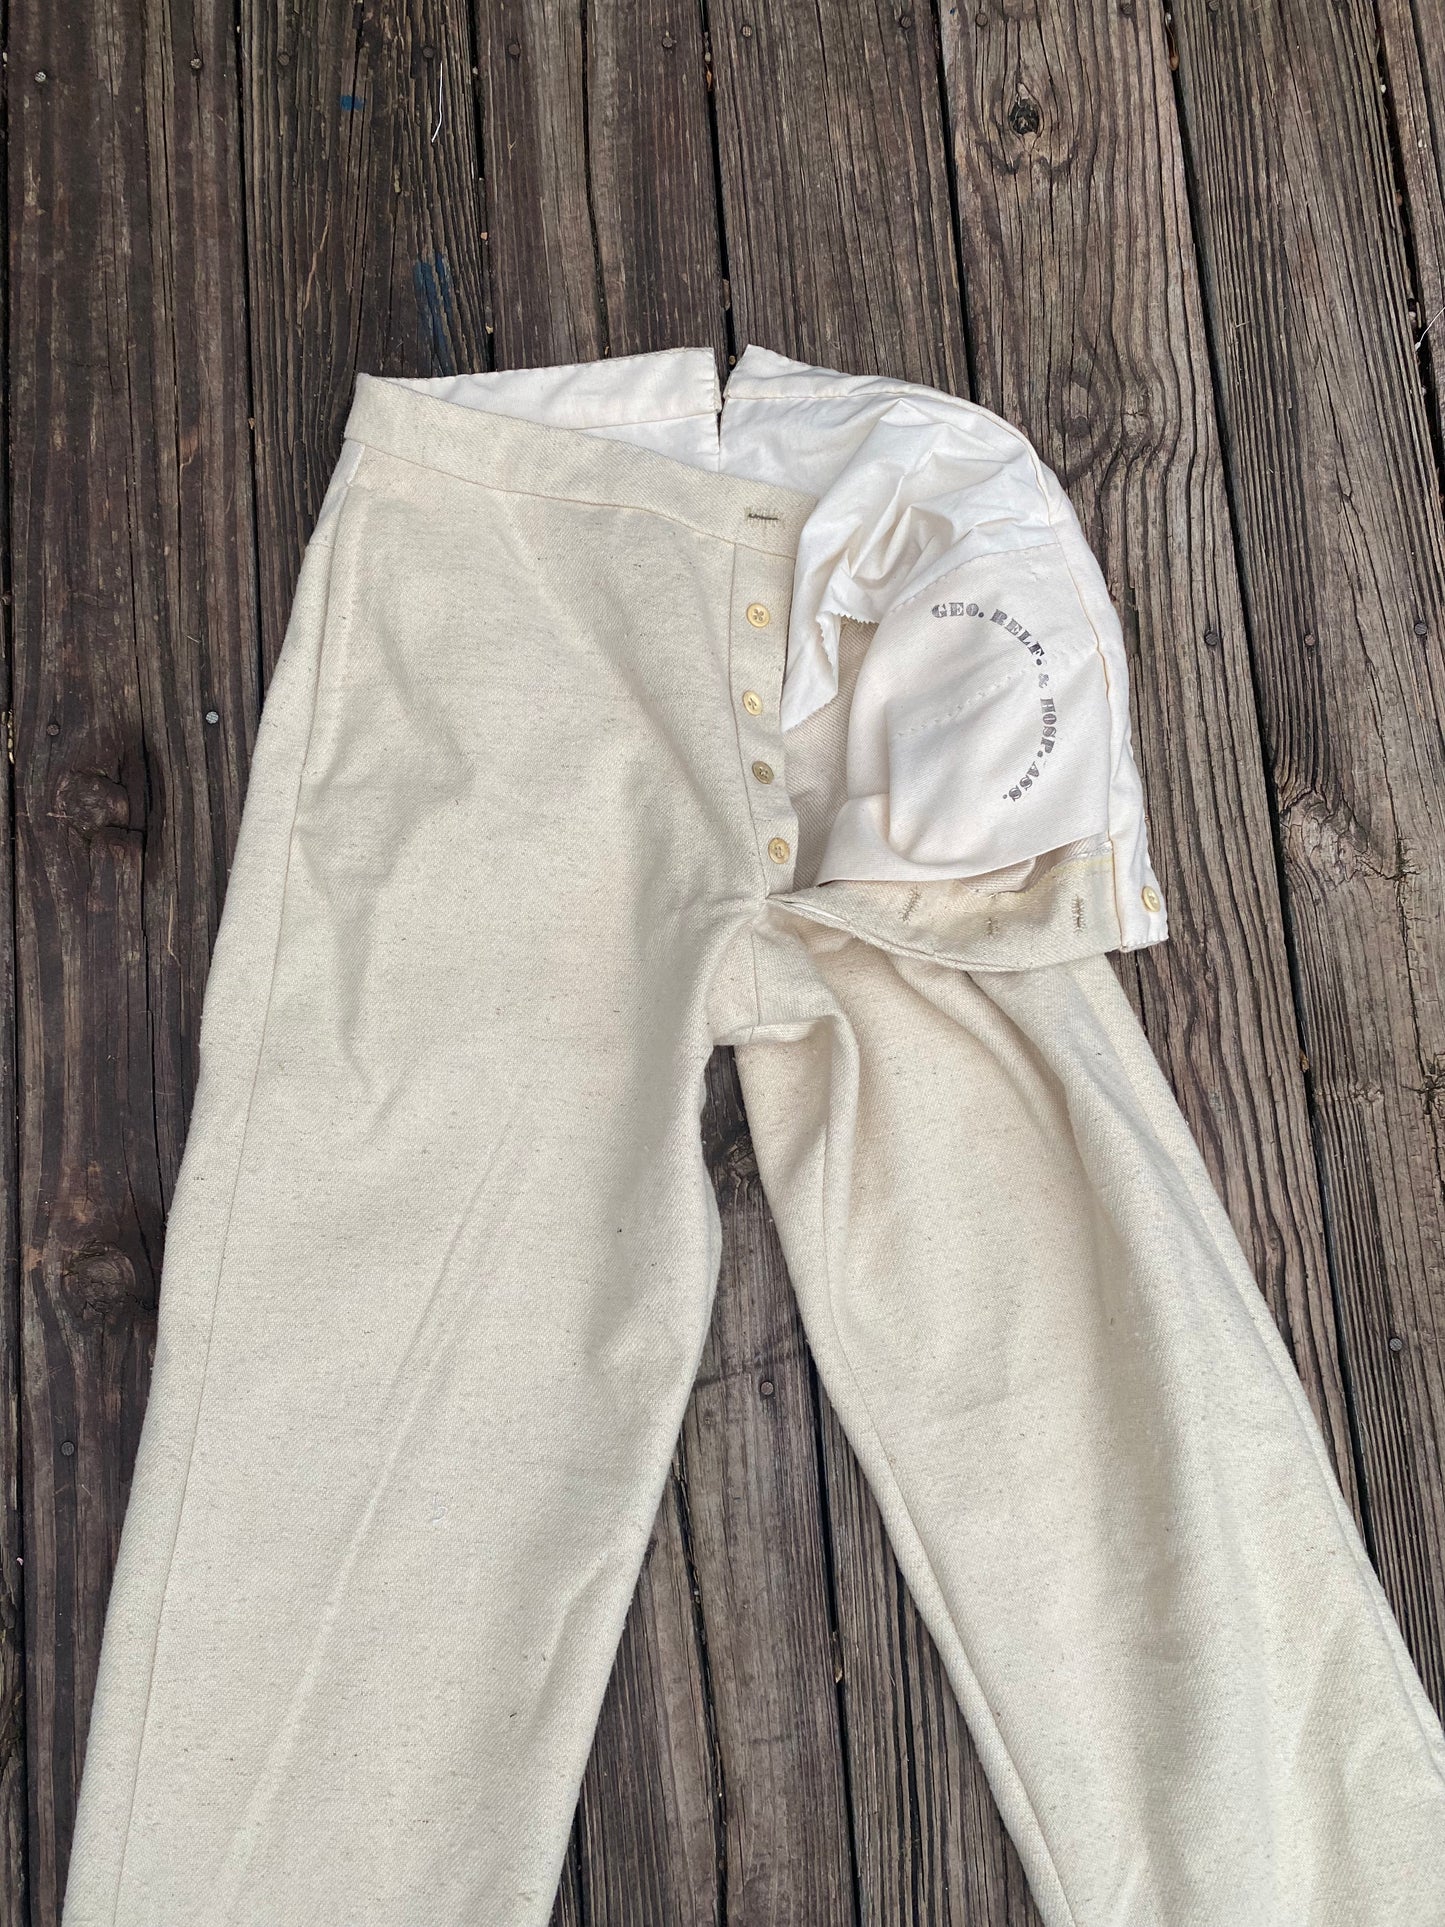 Georgia Relief and Hospital Association Trousers